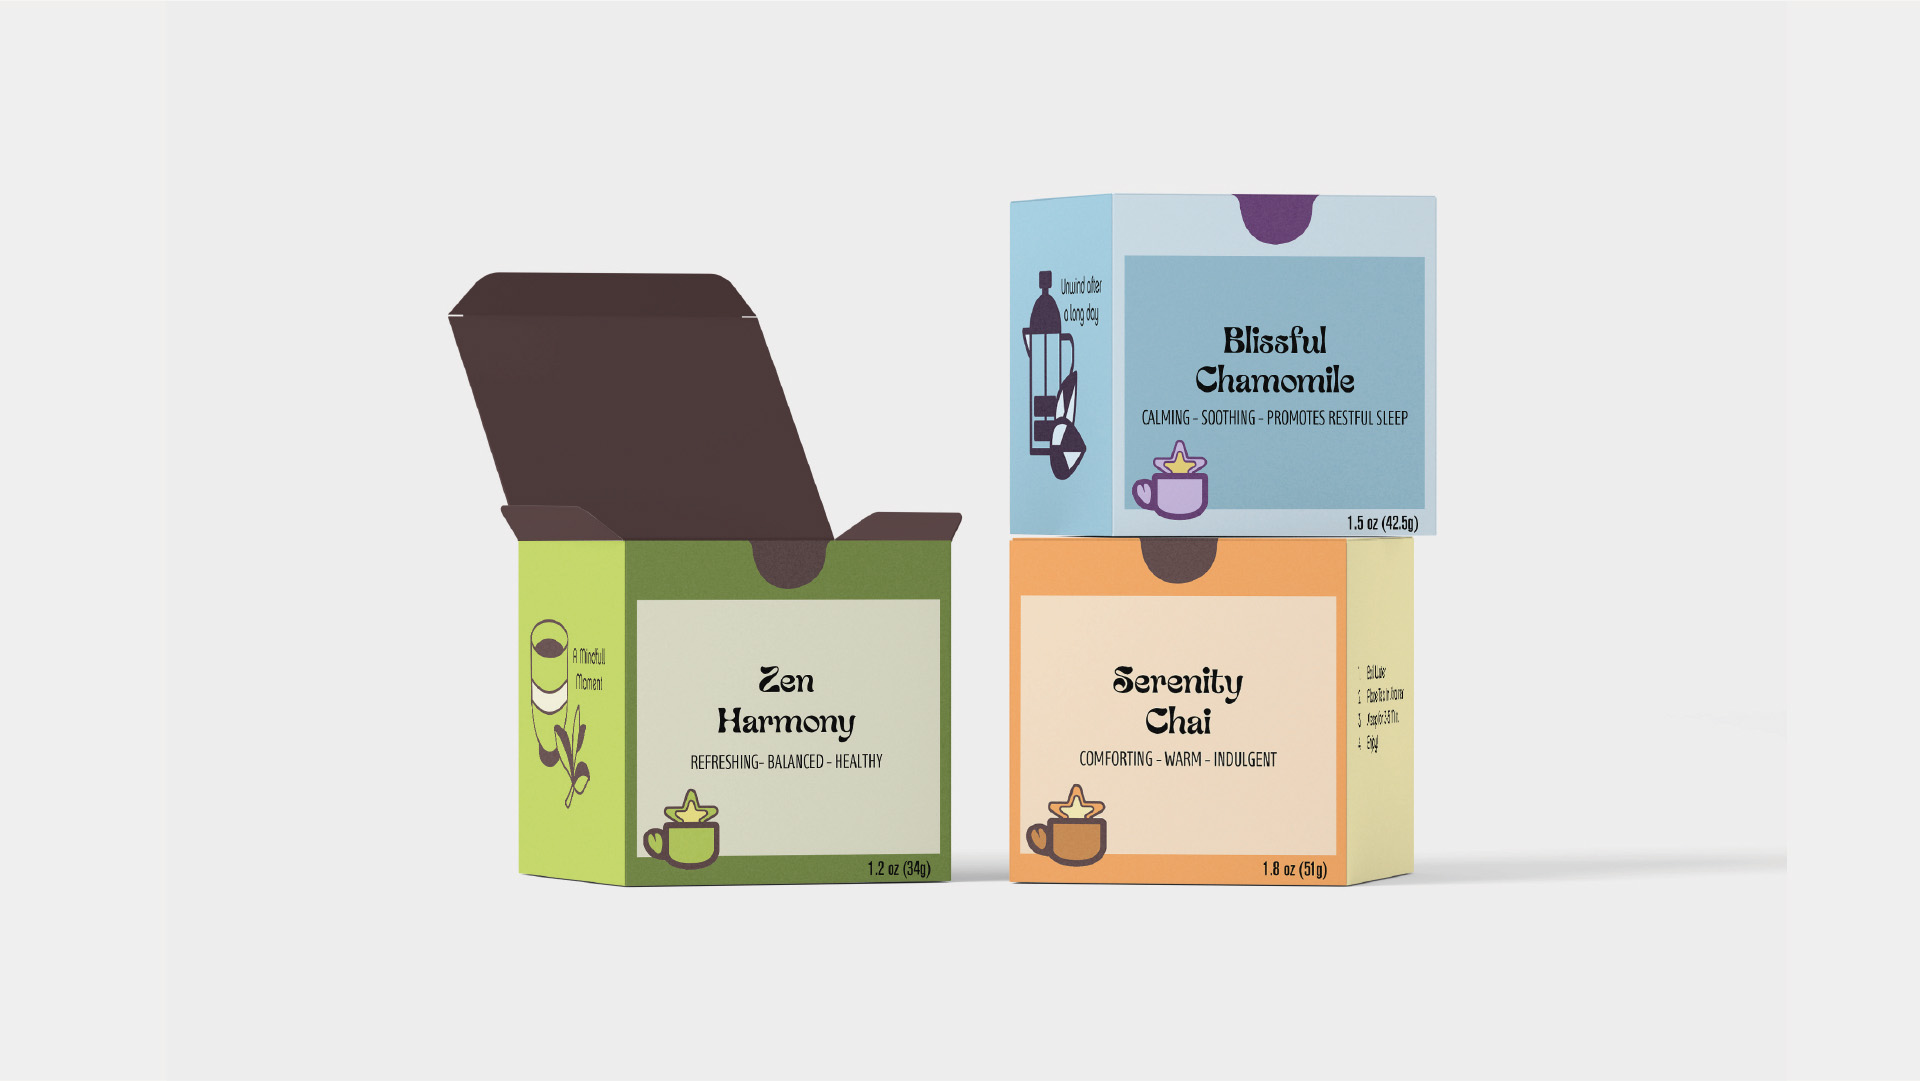 SereniTea / "SereniTea," package design for brand, 3 x 3 x 3 inch boxes, 2023. Molander created 3 cubed boxes to put the product of loose leaf tea‚ in for imaginary brand SereniTea. Branding, Logo, and Package Design were all part of this project. 